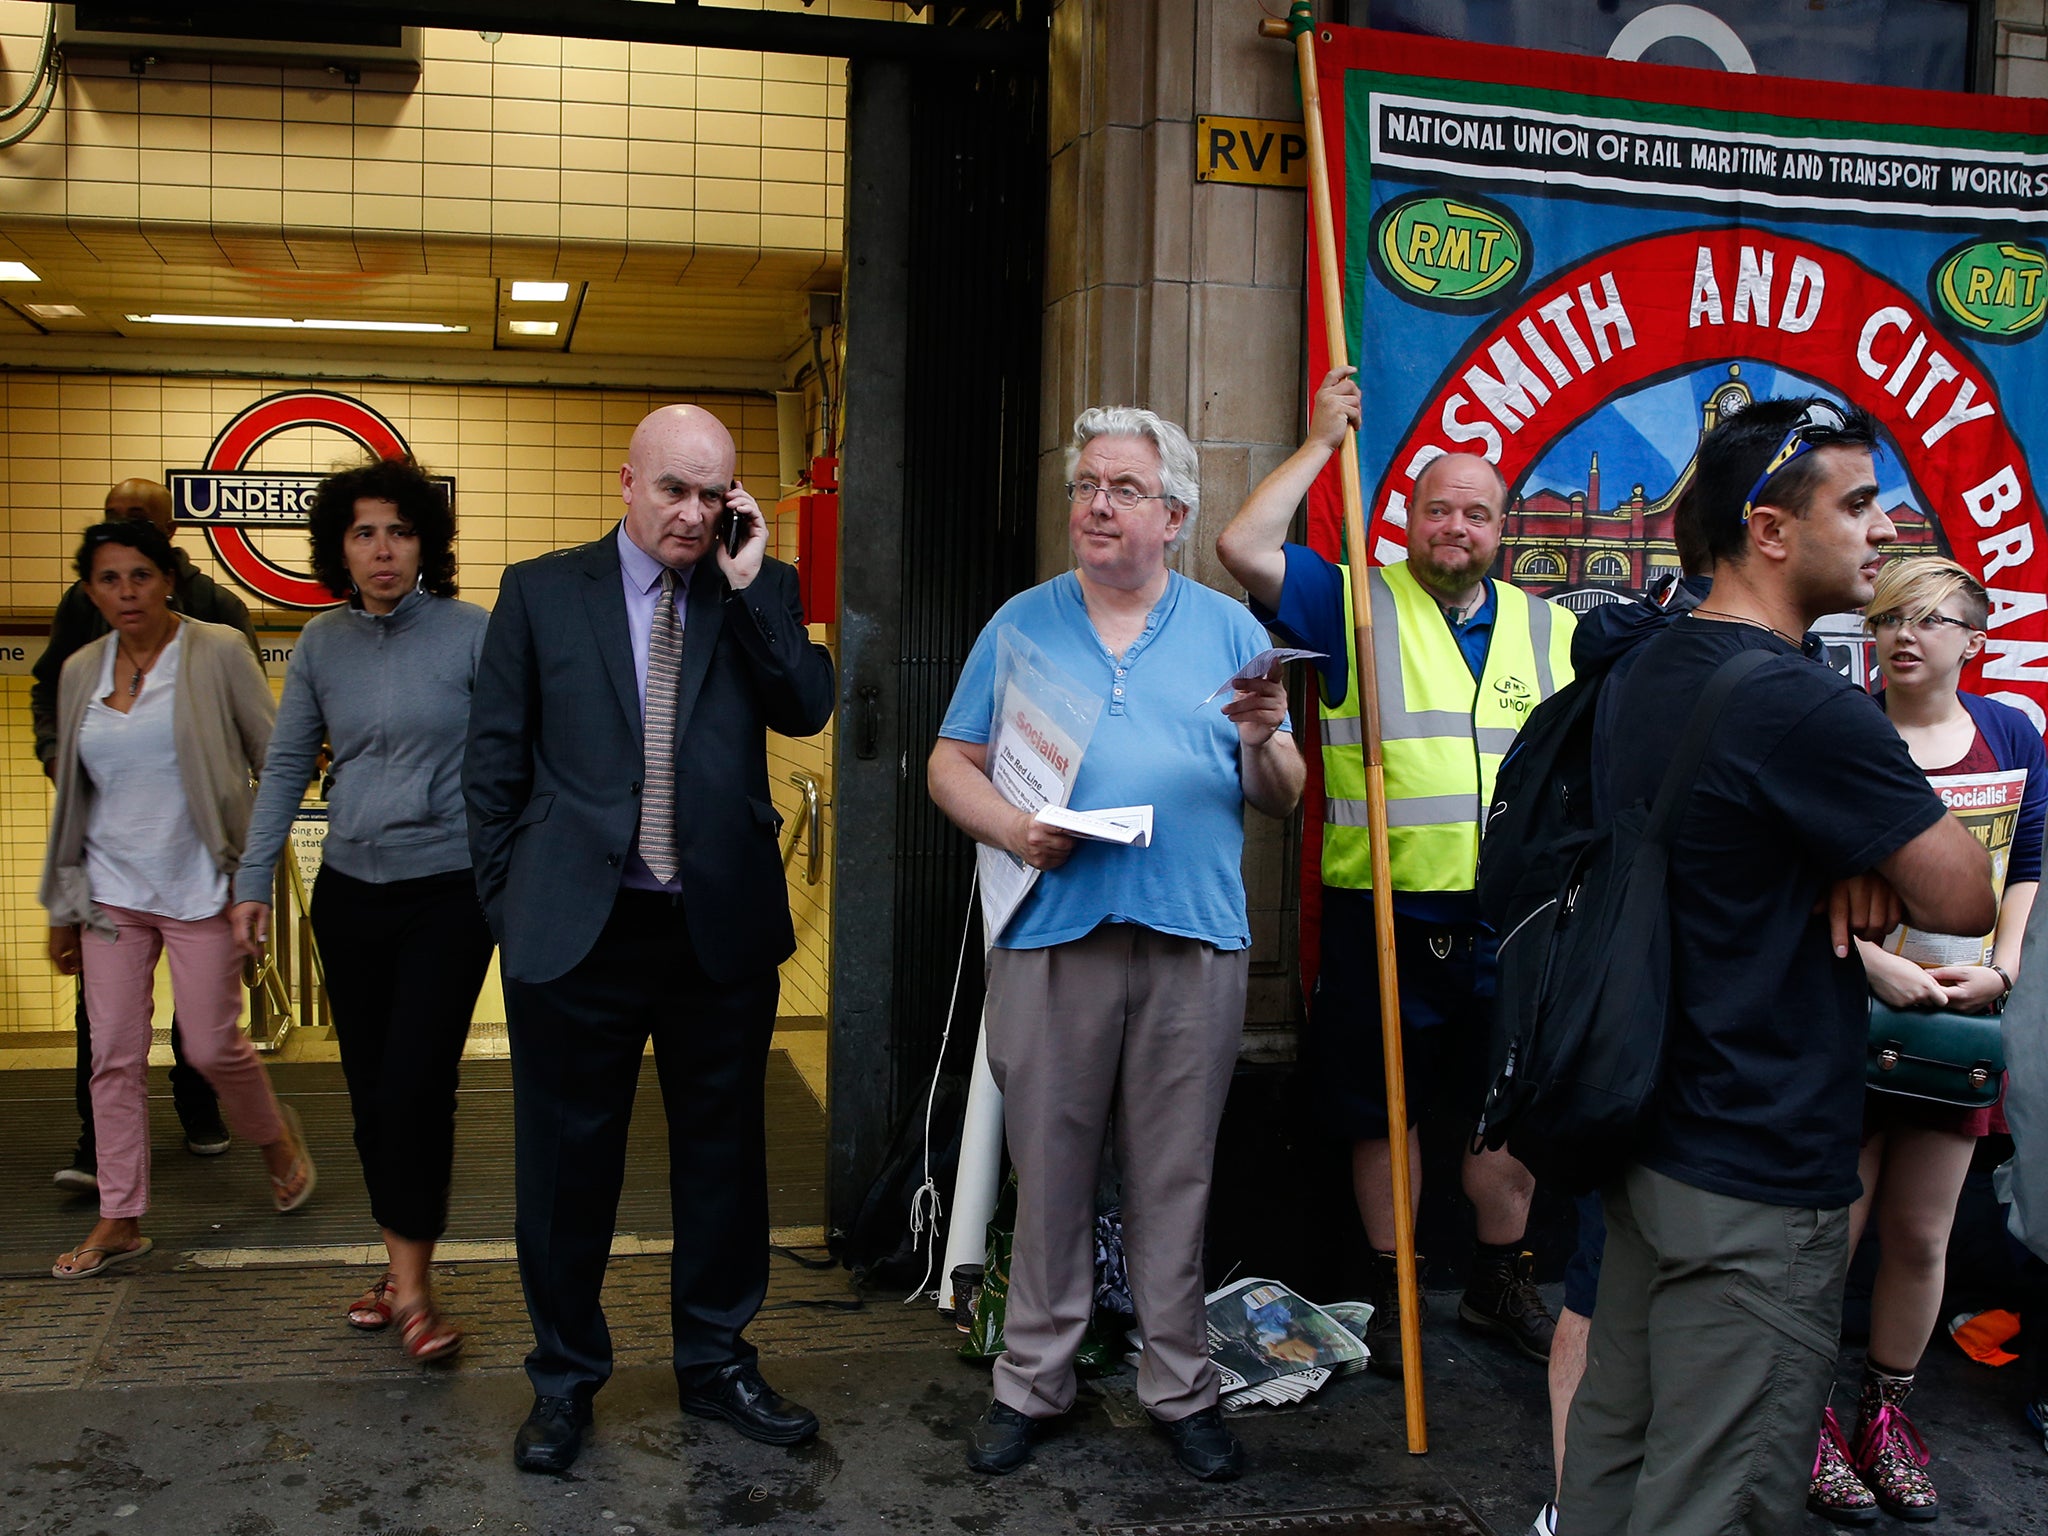 RMT union members gather outside Paddington Station as the union starts a 24 hour strike on the London Underground